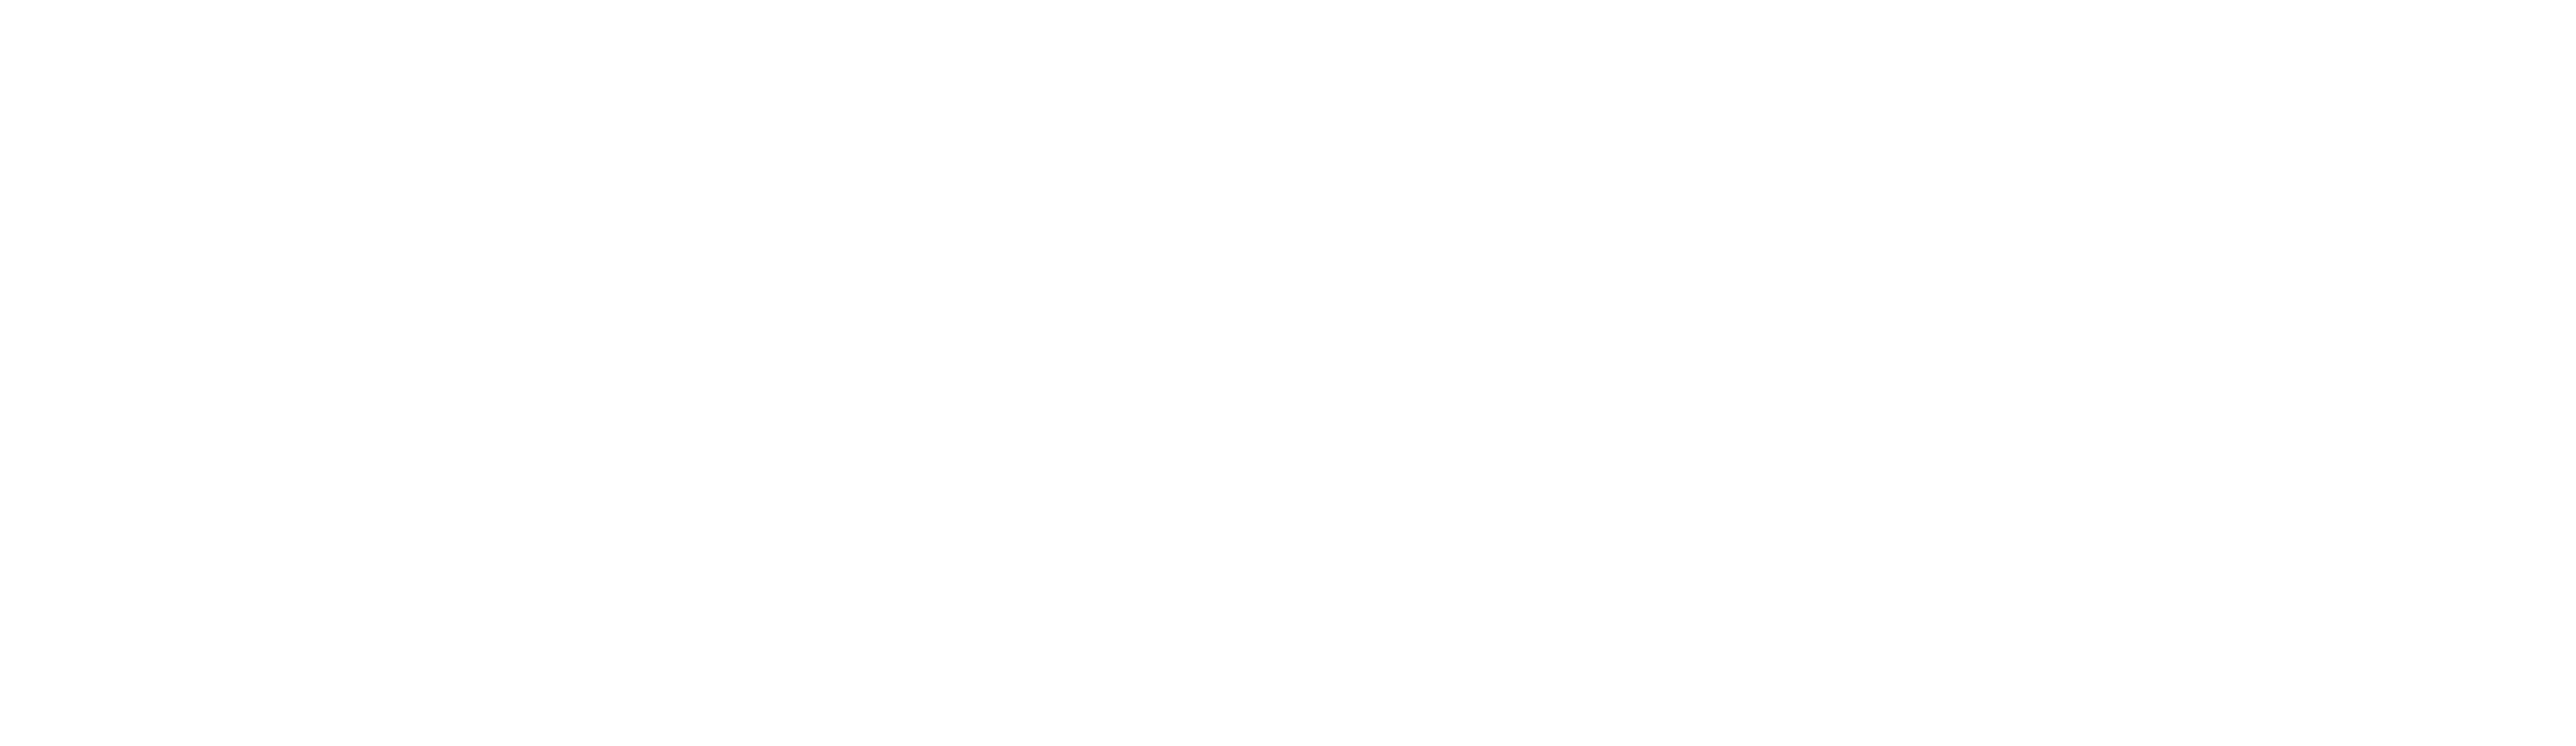 Clemson University College of Engineering, Computing and Applied Sciences, South Carolina